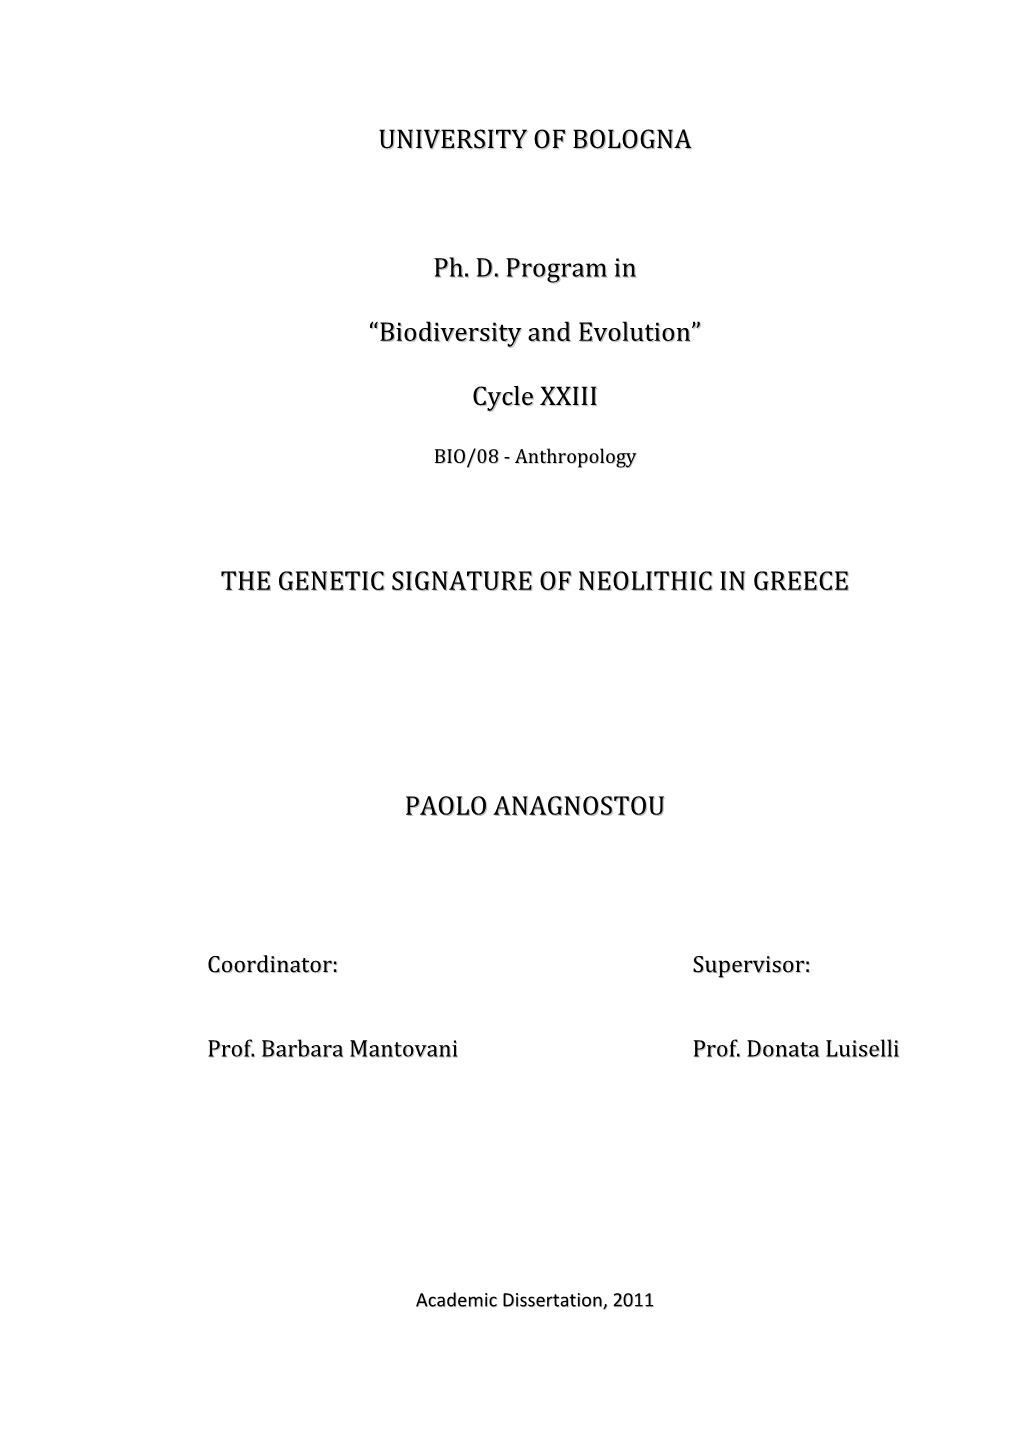 Cycle XXIII the GENETIC SIGNATURE of NEOLITHIC IN